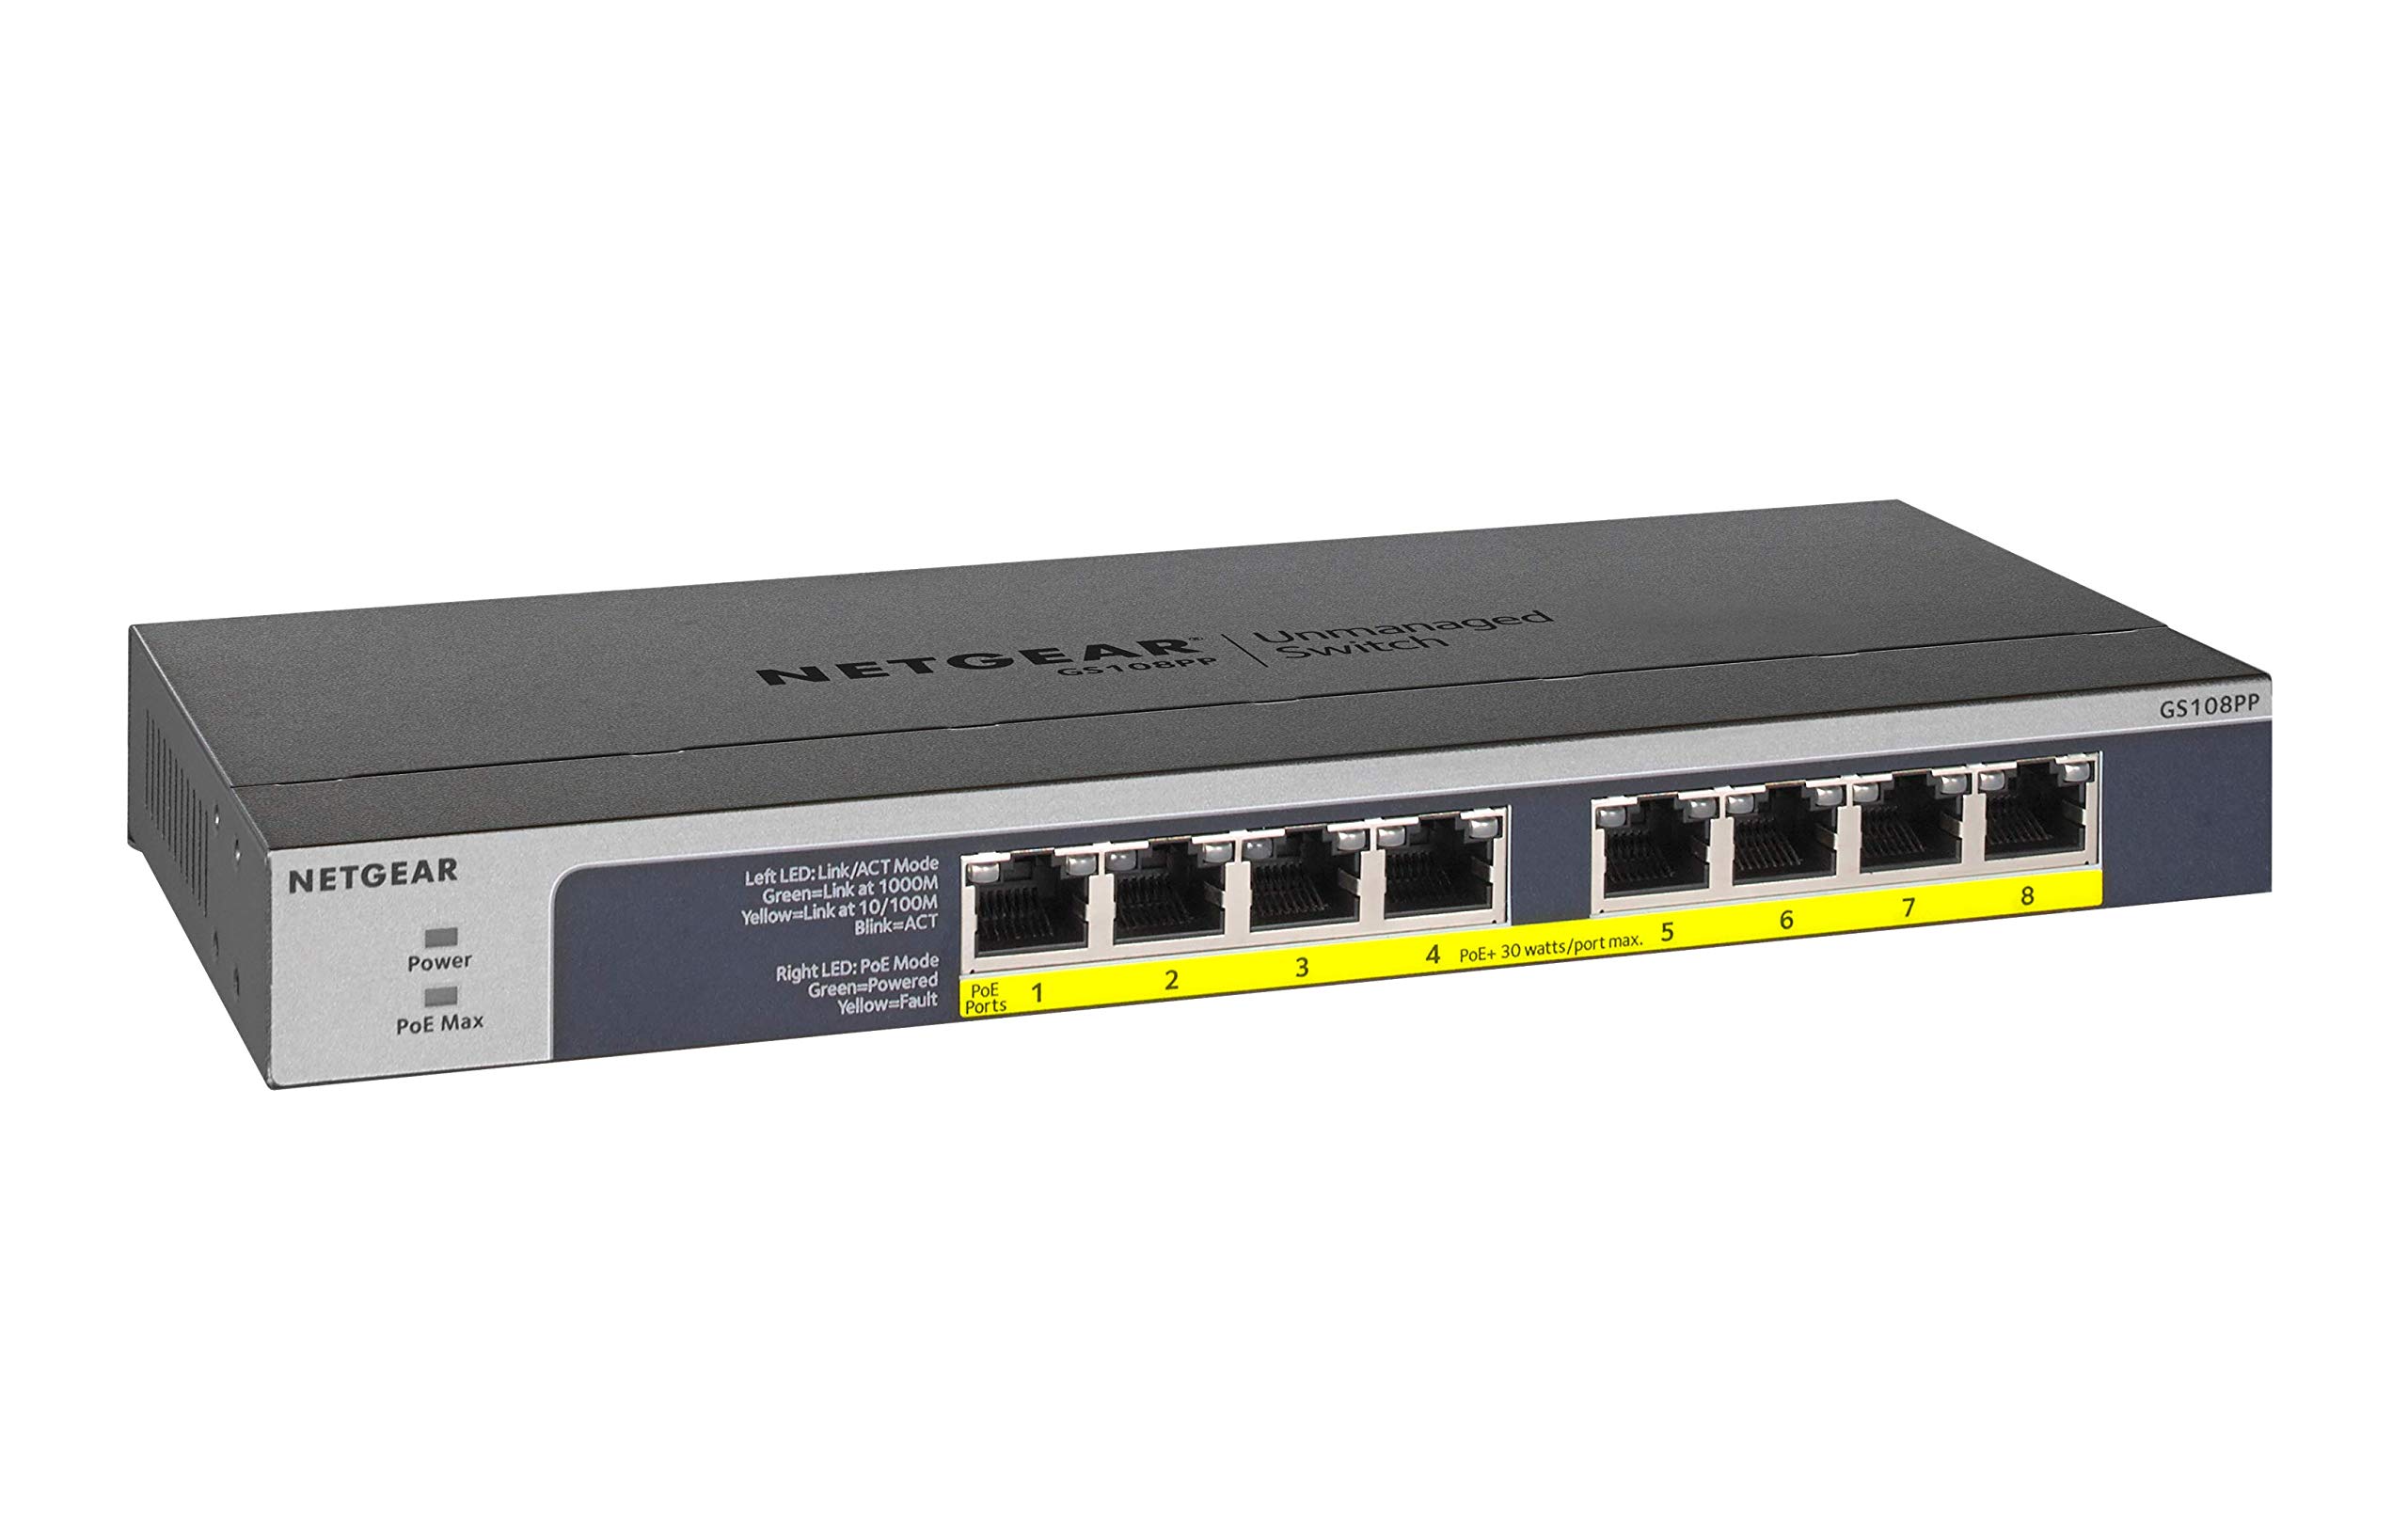 Book Cover NETGEAR 8-Port Gigabit Ethernet Unmanaged PoE Switch (GS108PP) - with 8 x PoE+ @ 123W Upgradeable, Desktop, Wall Mount or Rackmount, and Limited Lifetime Protection